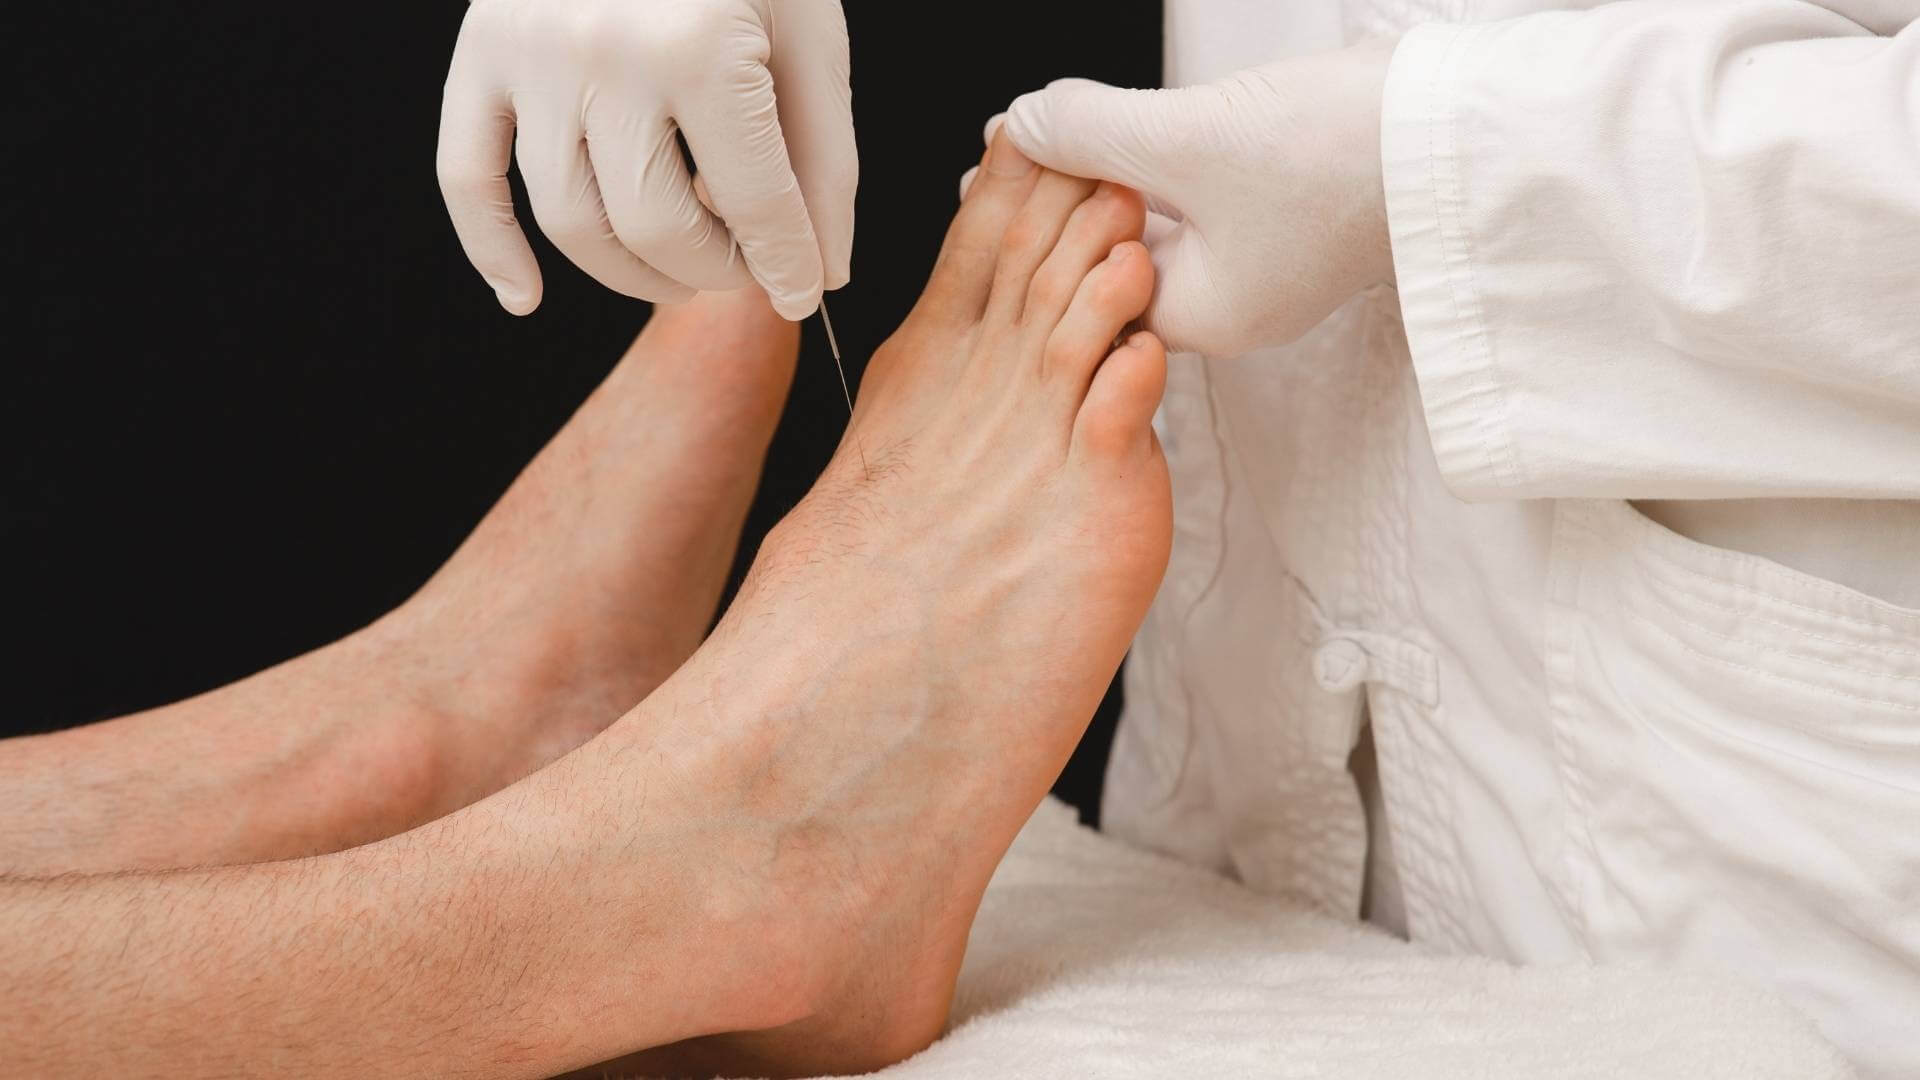 Dry needling vs acupuncture for feet treatment